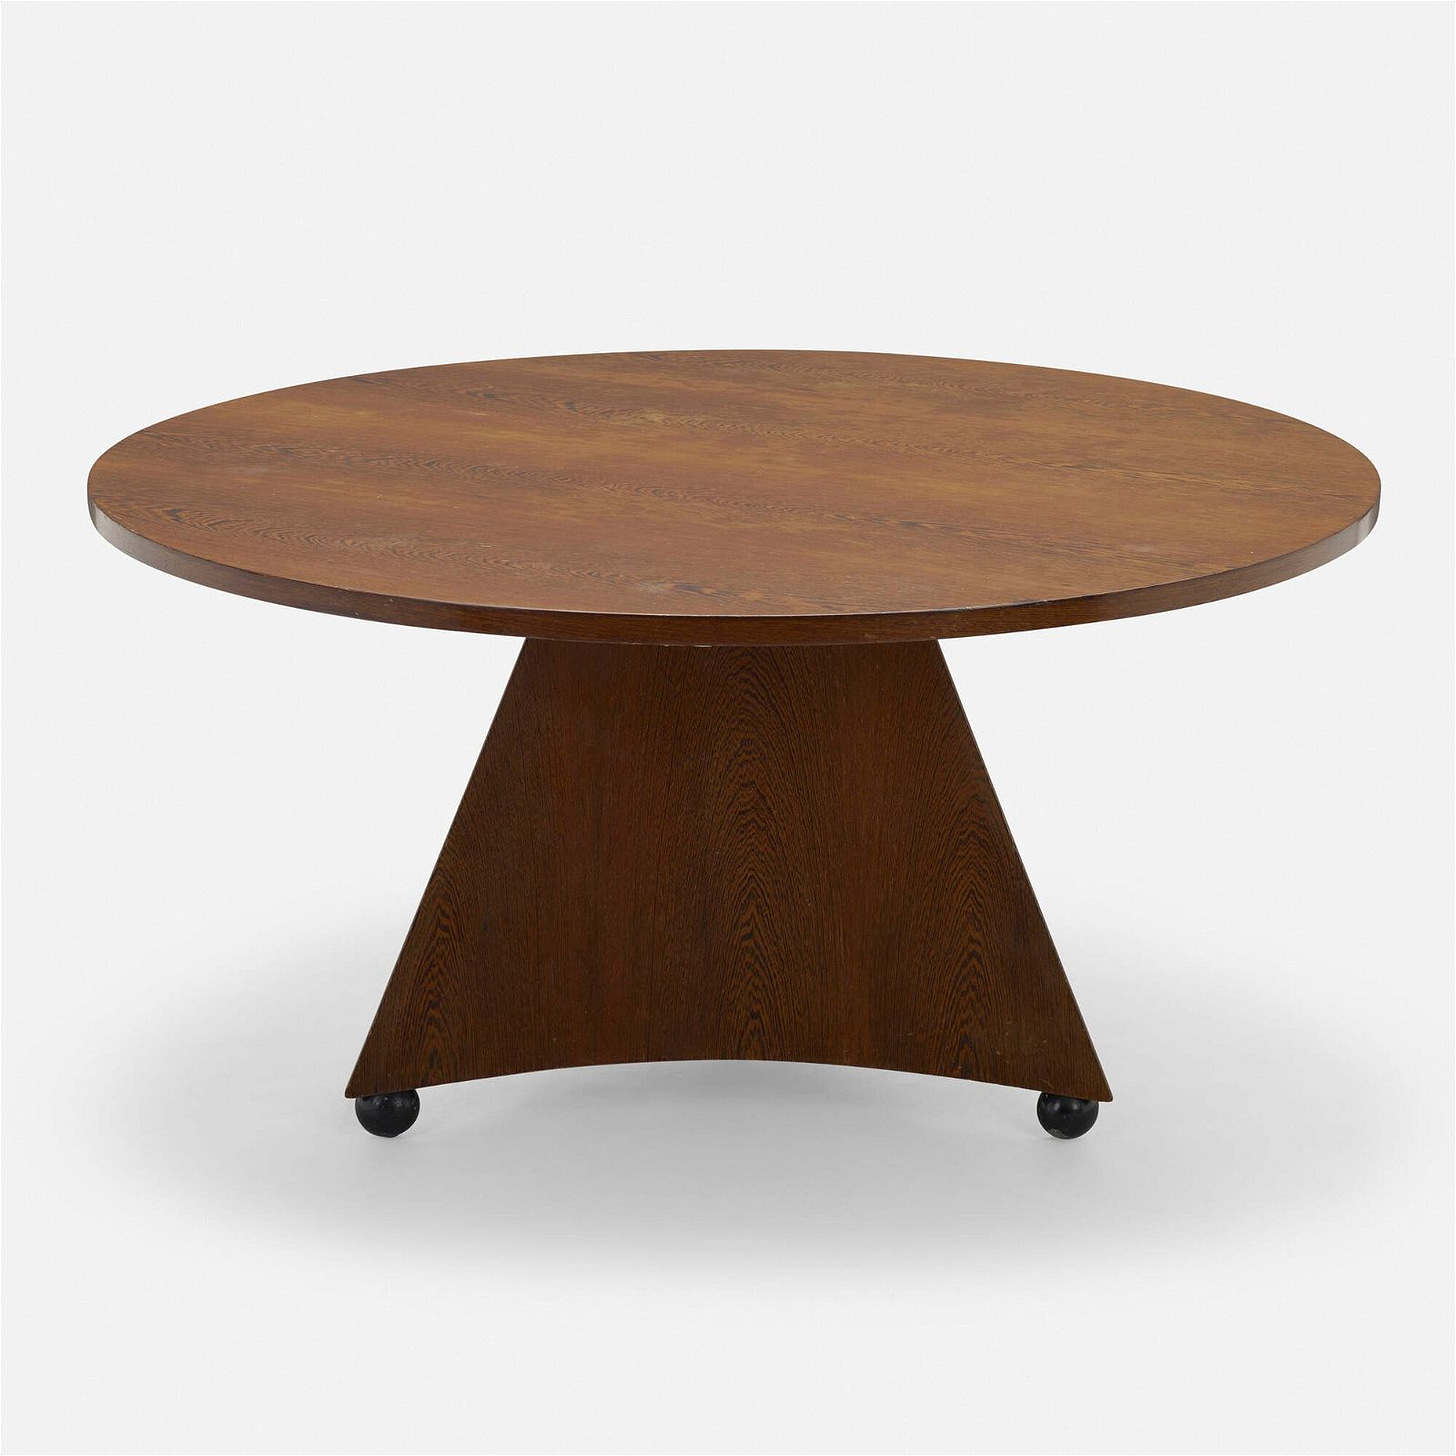 Heal's, Prototype dining table